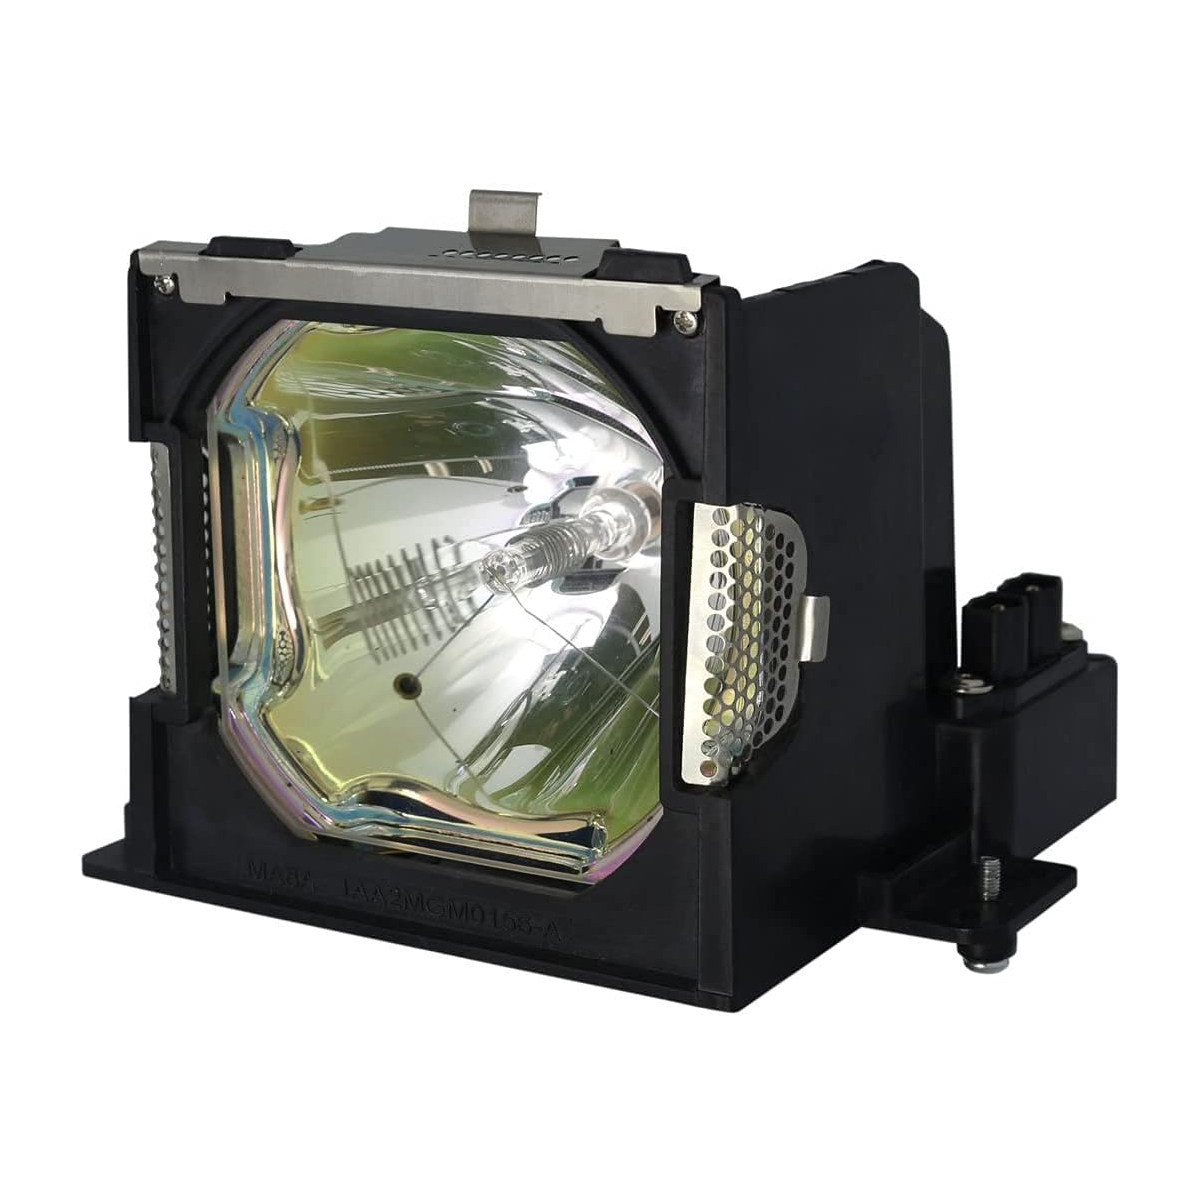 Replacement Projector lamp POA-LMP38 For Sanyo PL C-XP40 PL C-XP40L PL C-XP45 PL C-XP45L